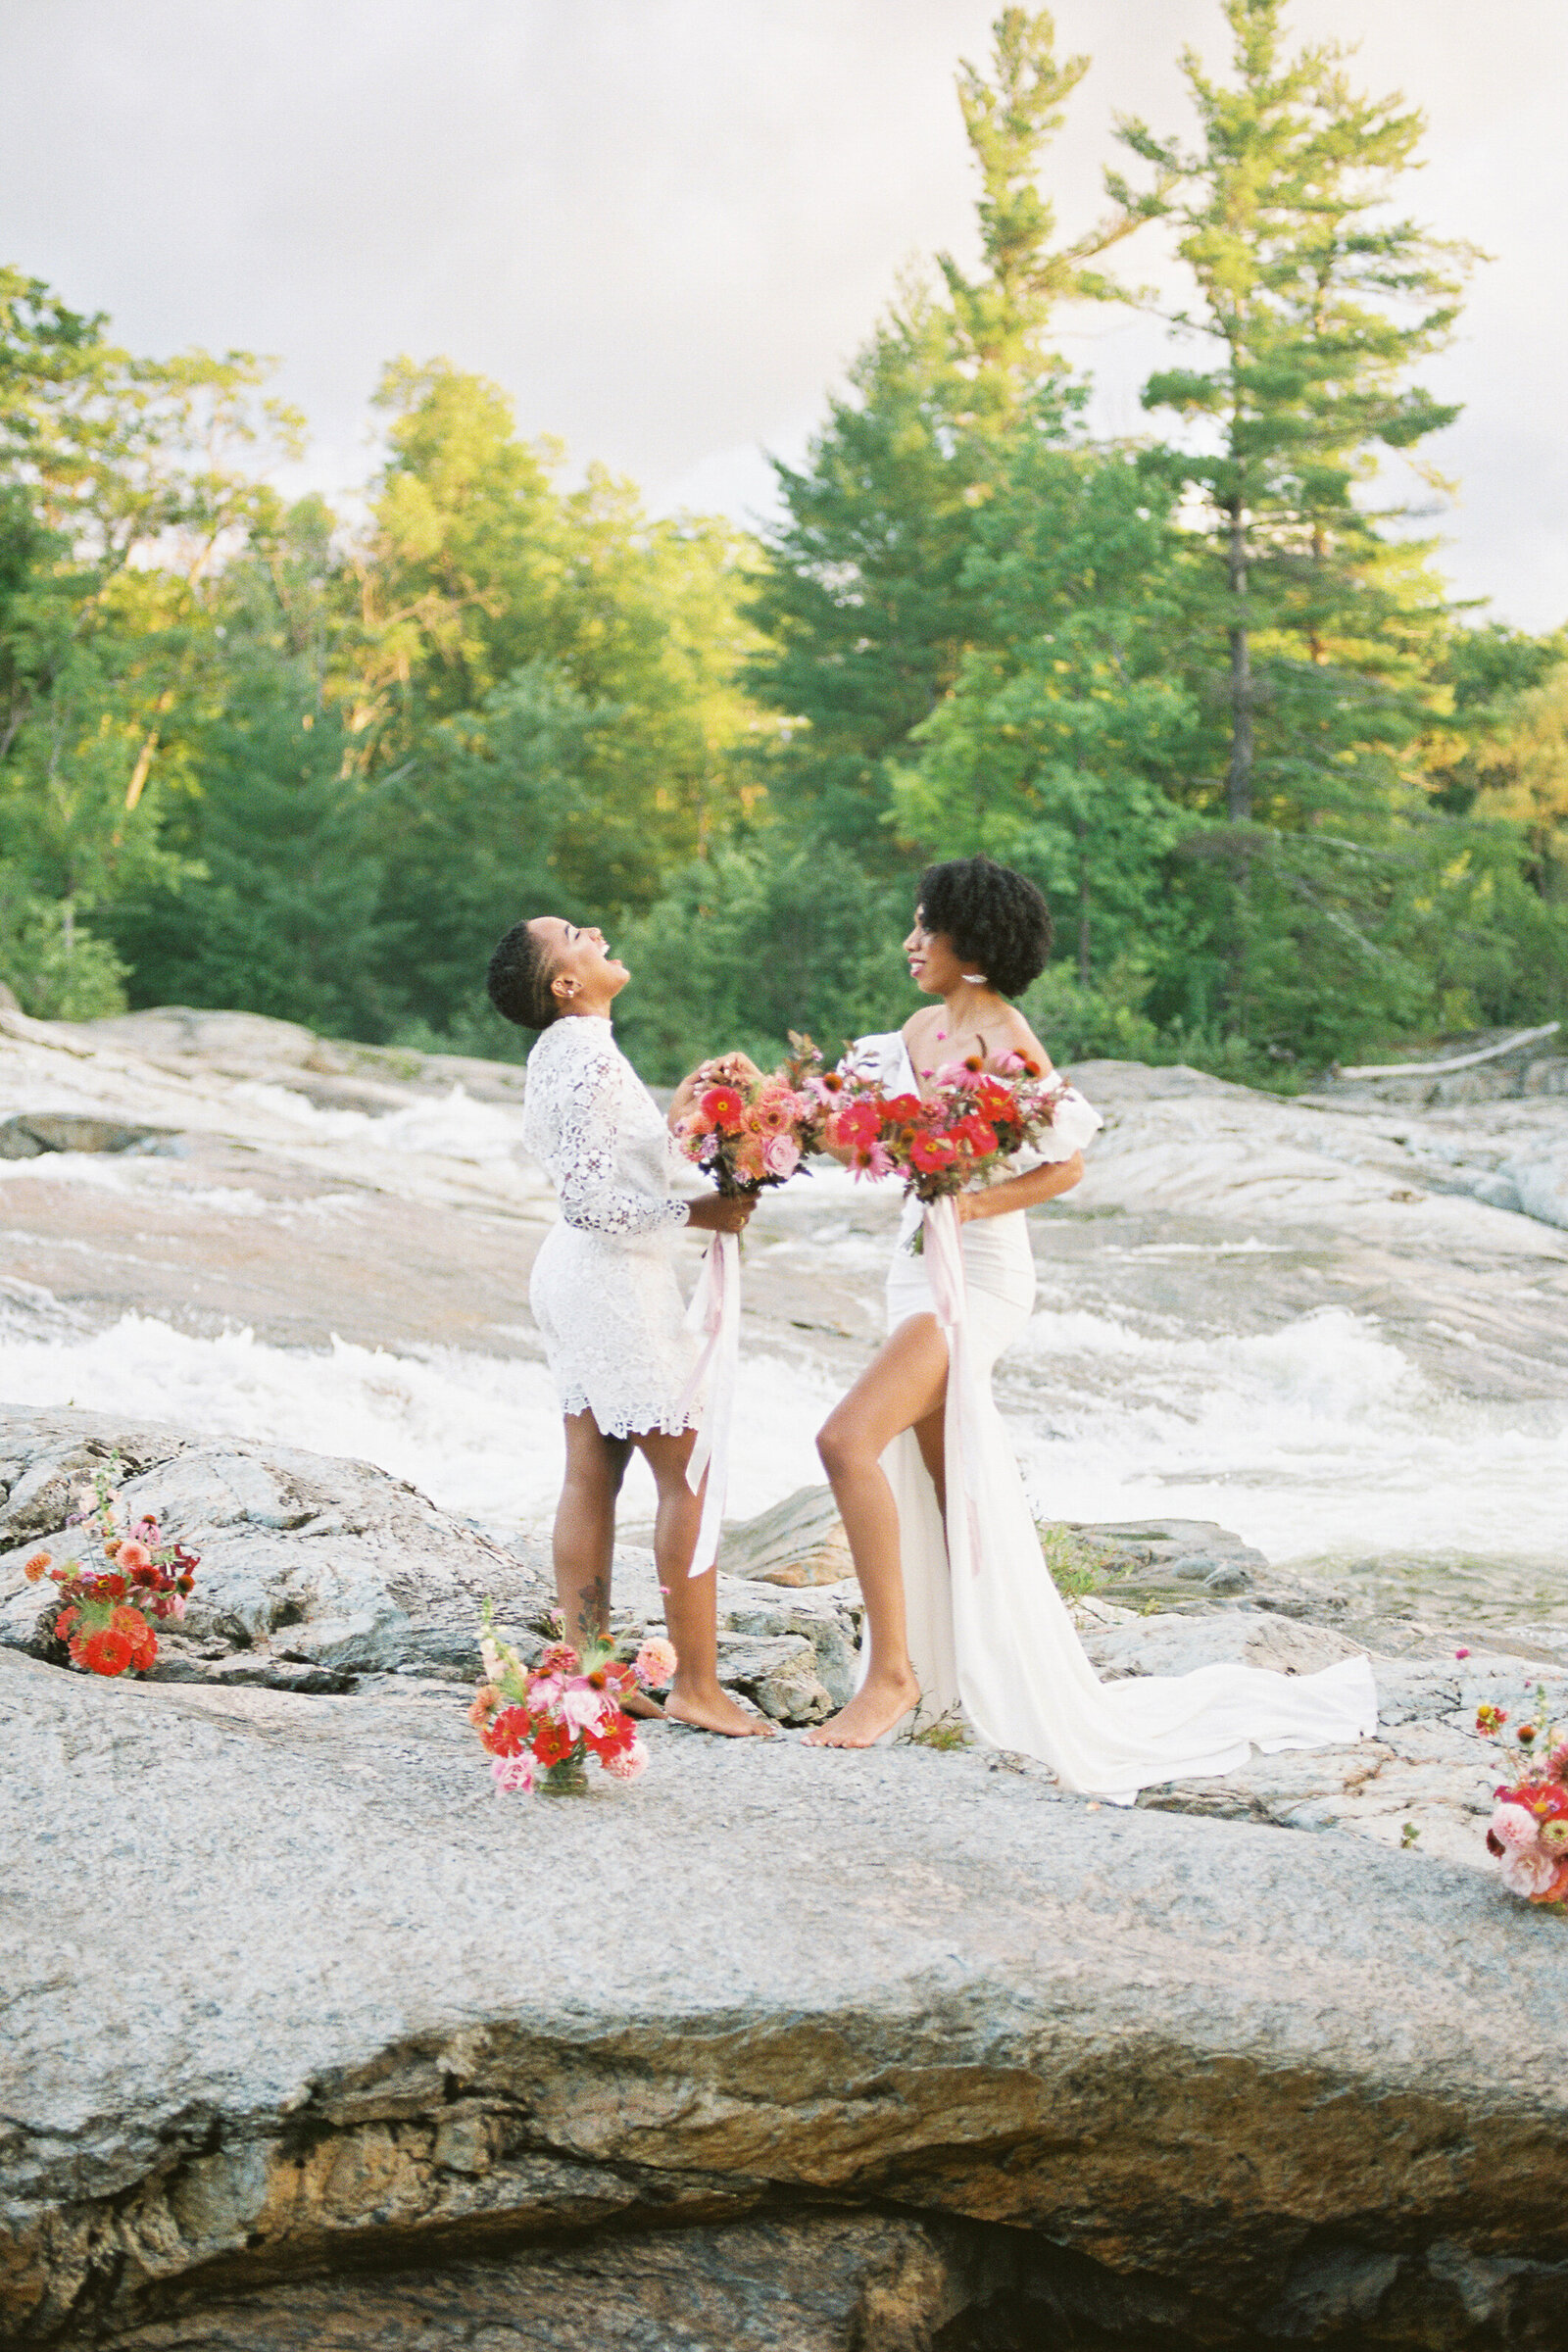 Two brides laughing while standing on rocks with flowers around them.